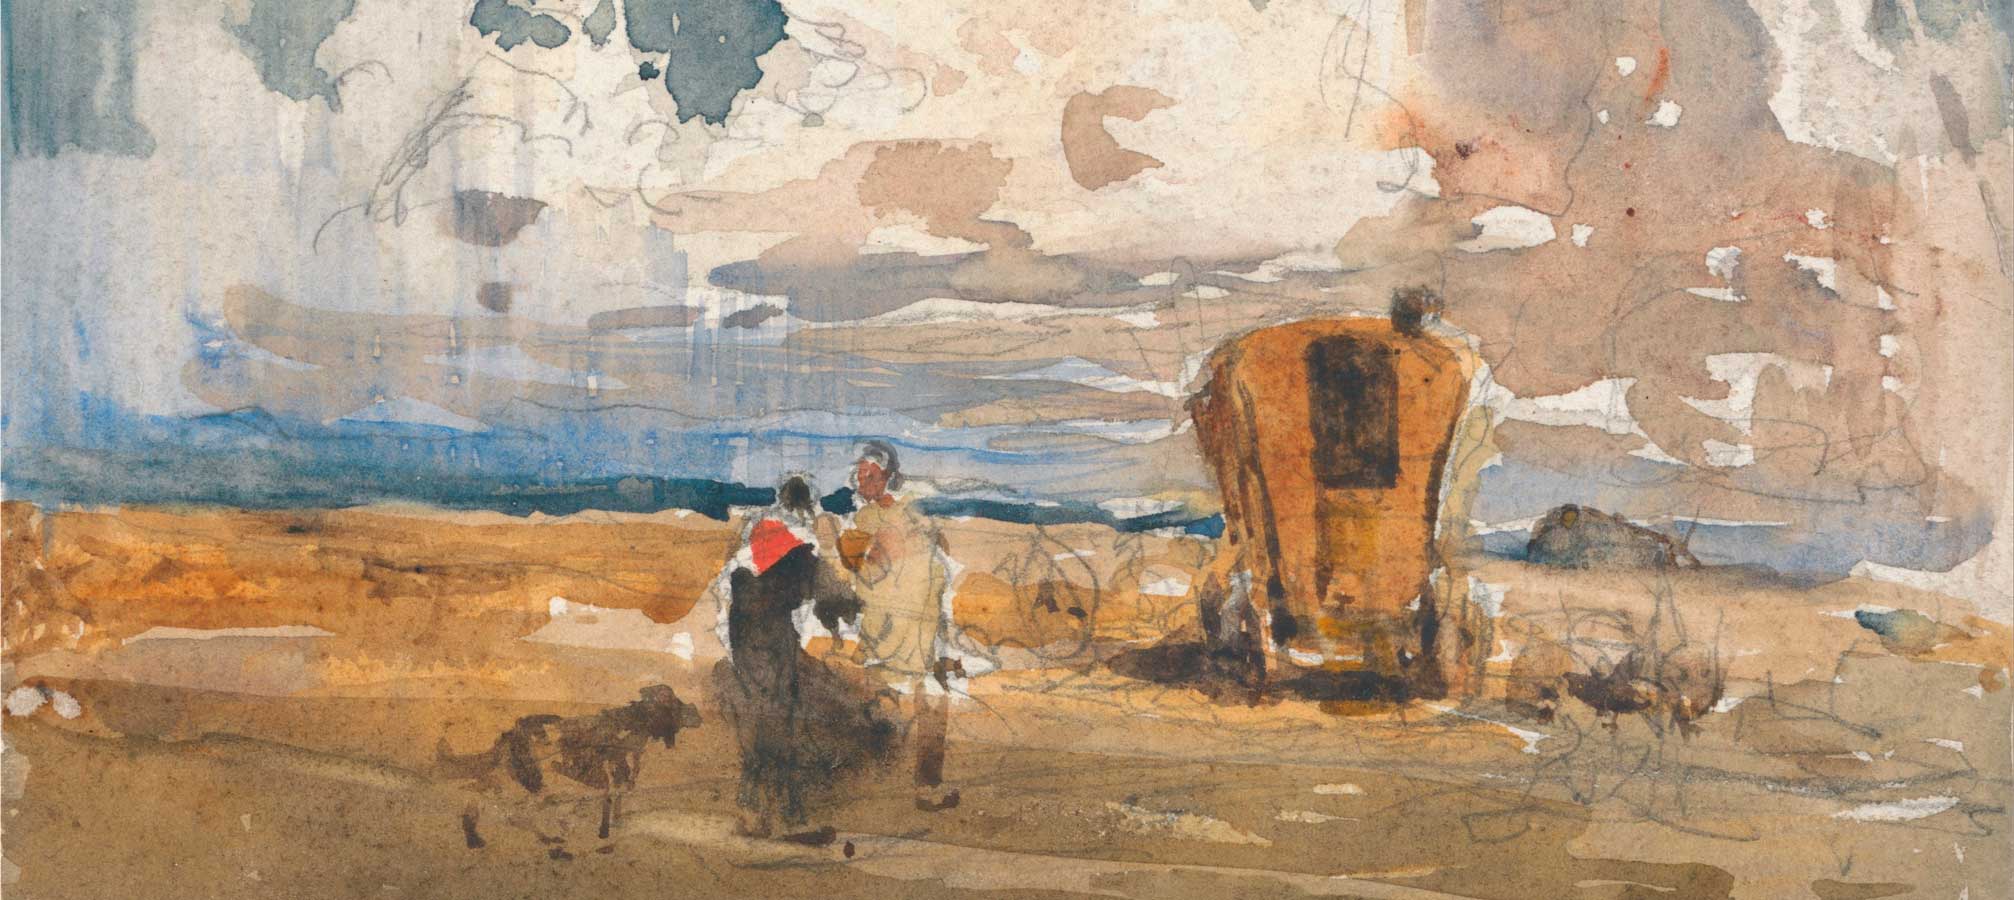 Landscape with Gypsies and Wagon, David Cox